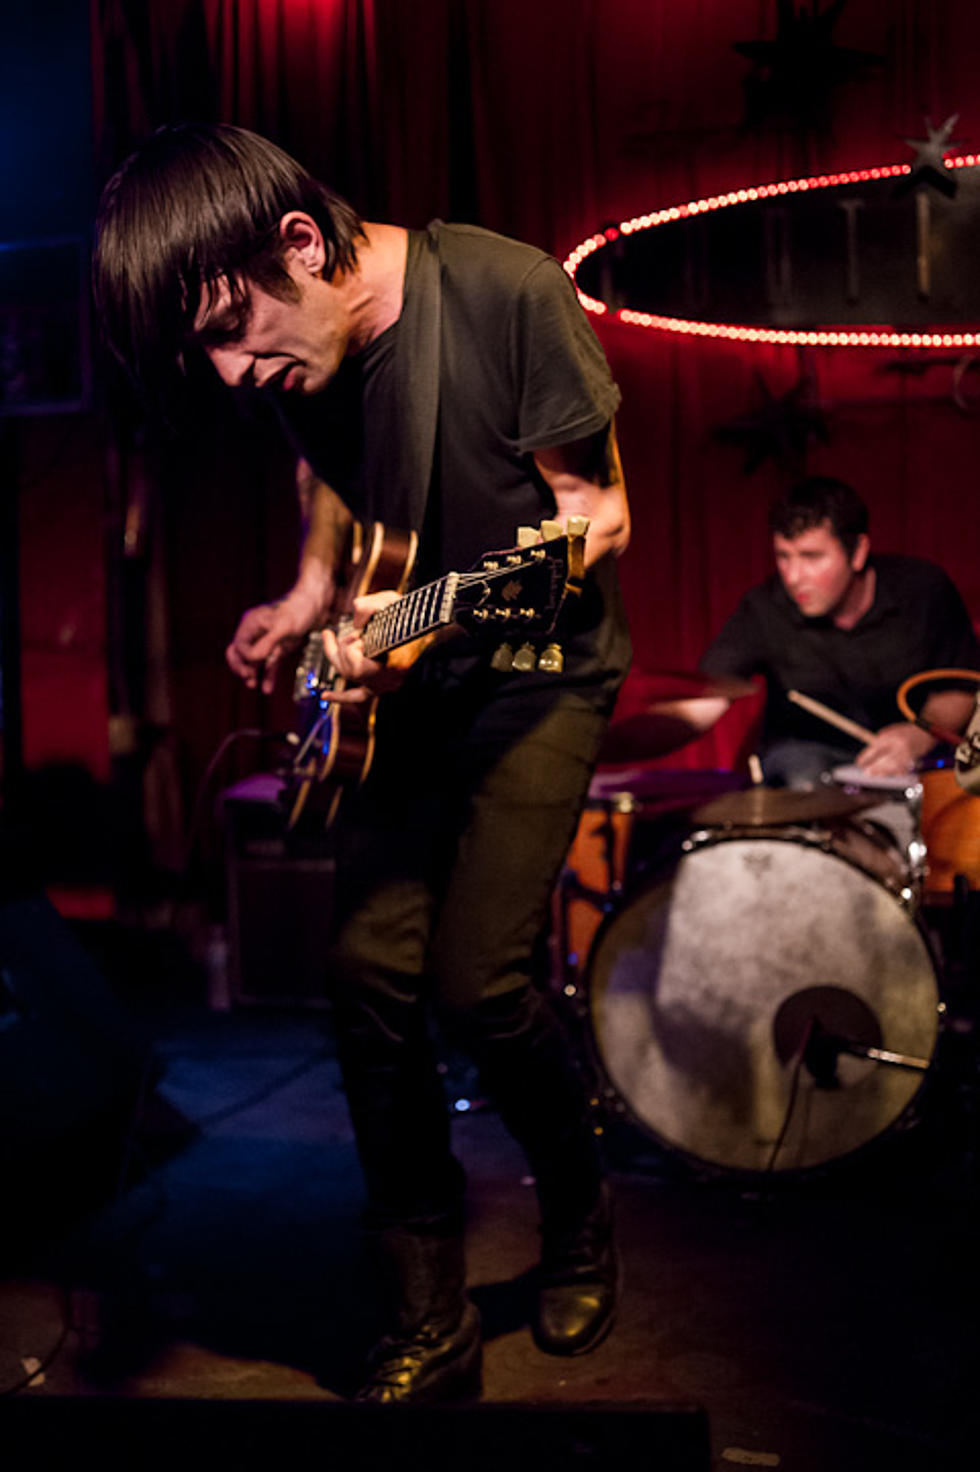 Divine Fits played a secret show at the Continental Club in Austin, their first-ever live performance (pics, video, setlist)